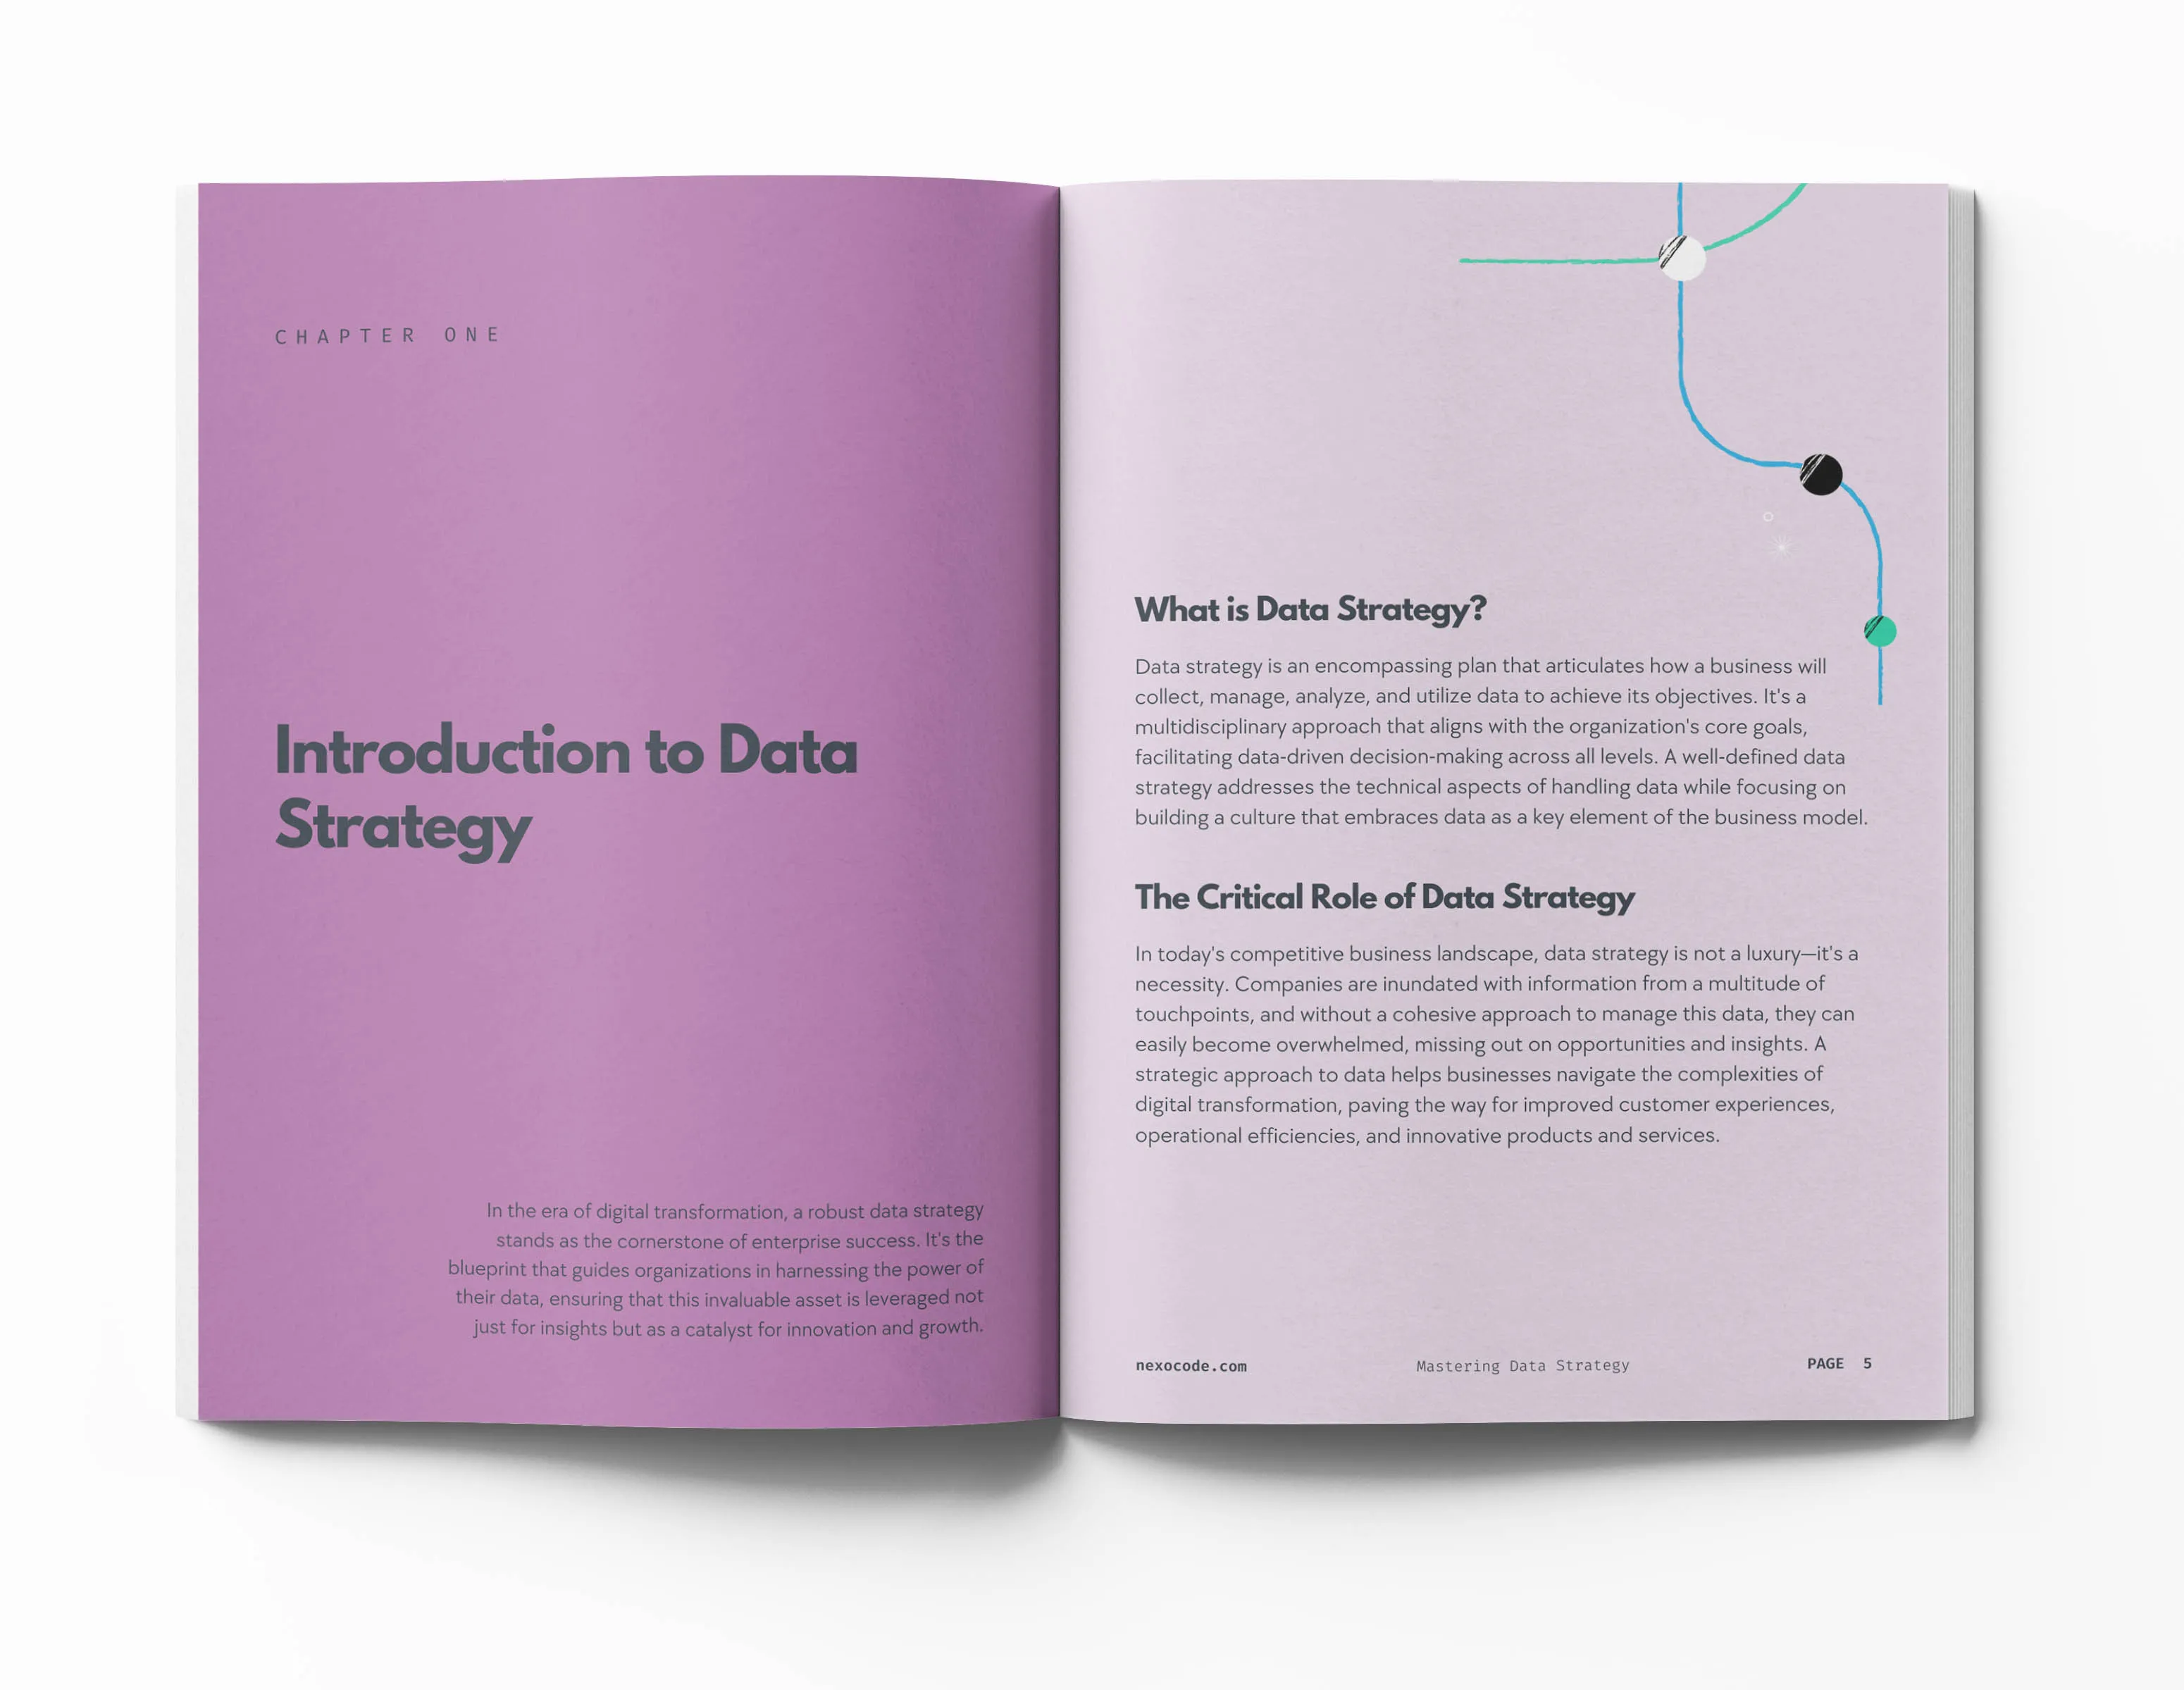 Are you ready to unlock full potential of data strategy?